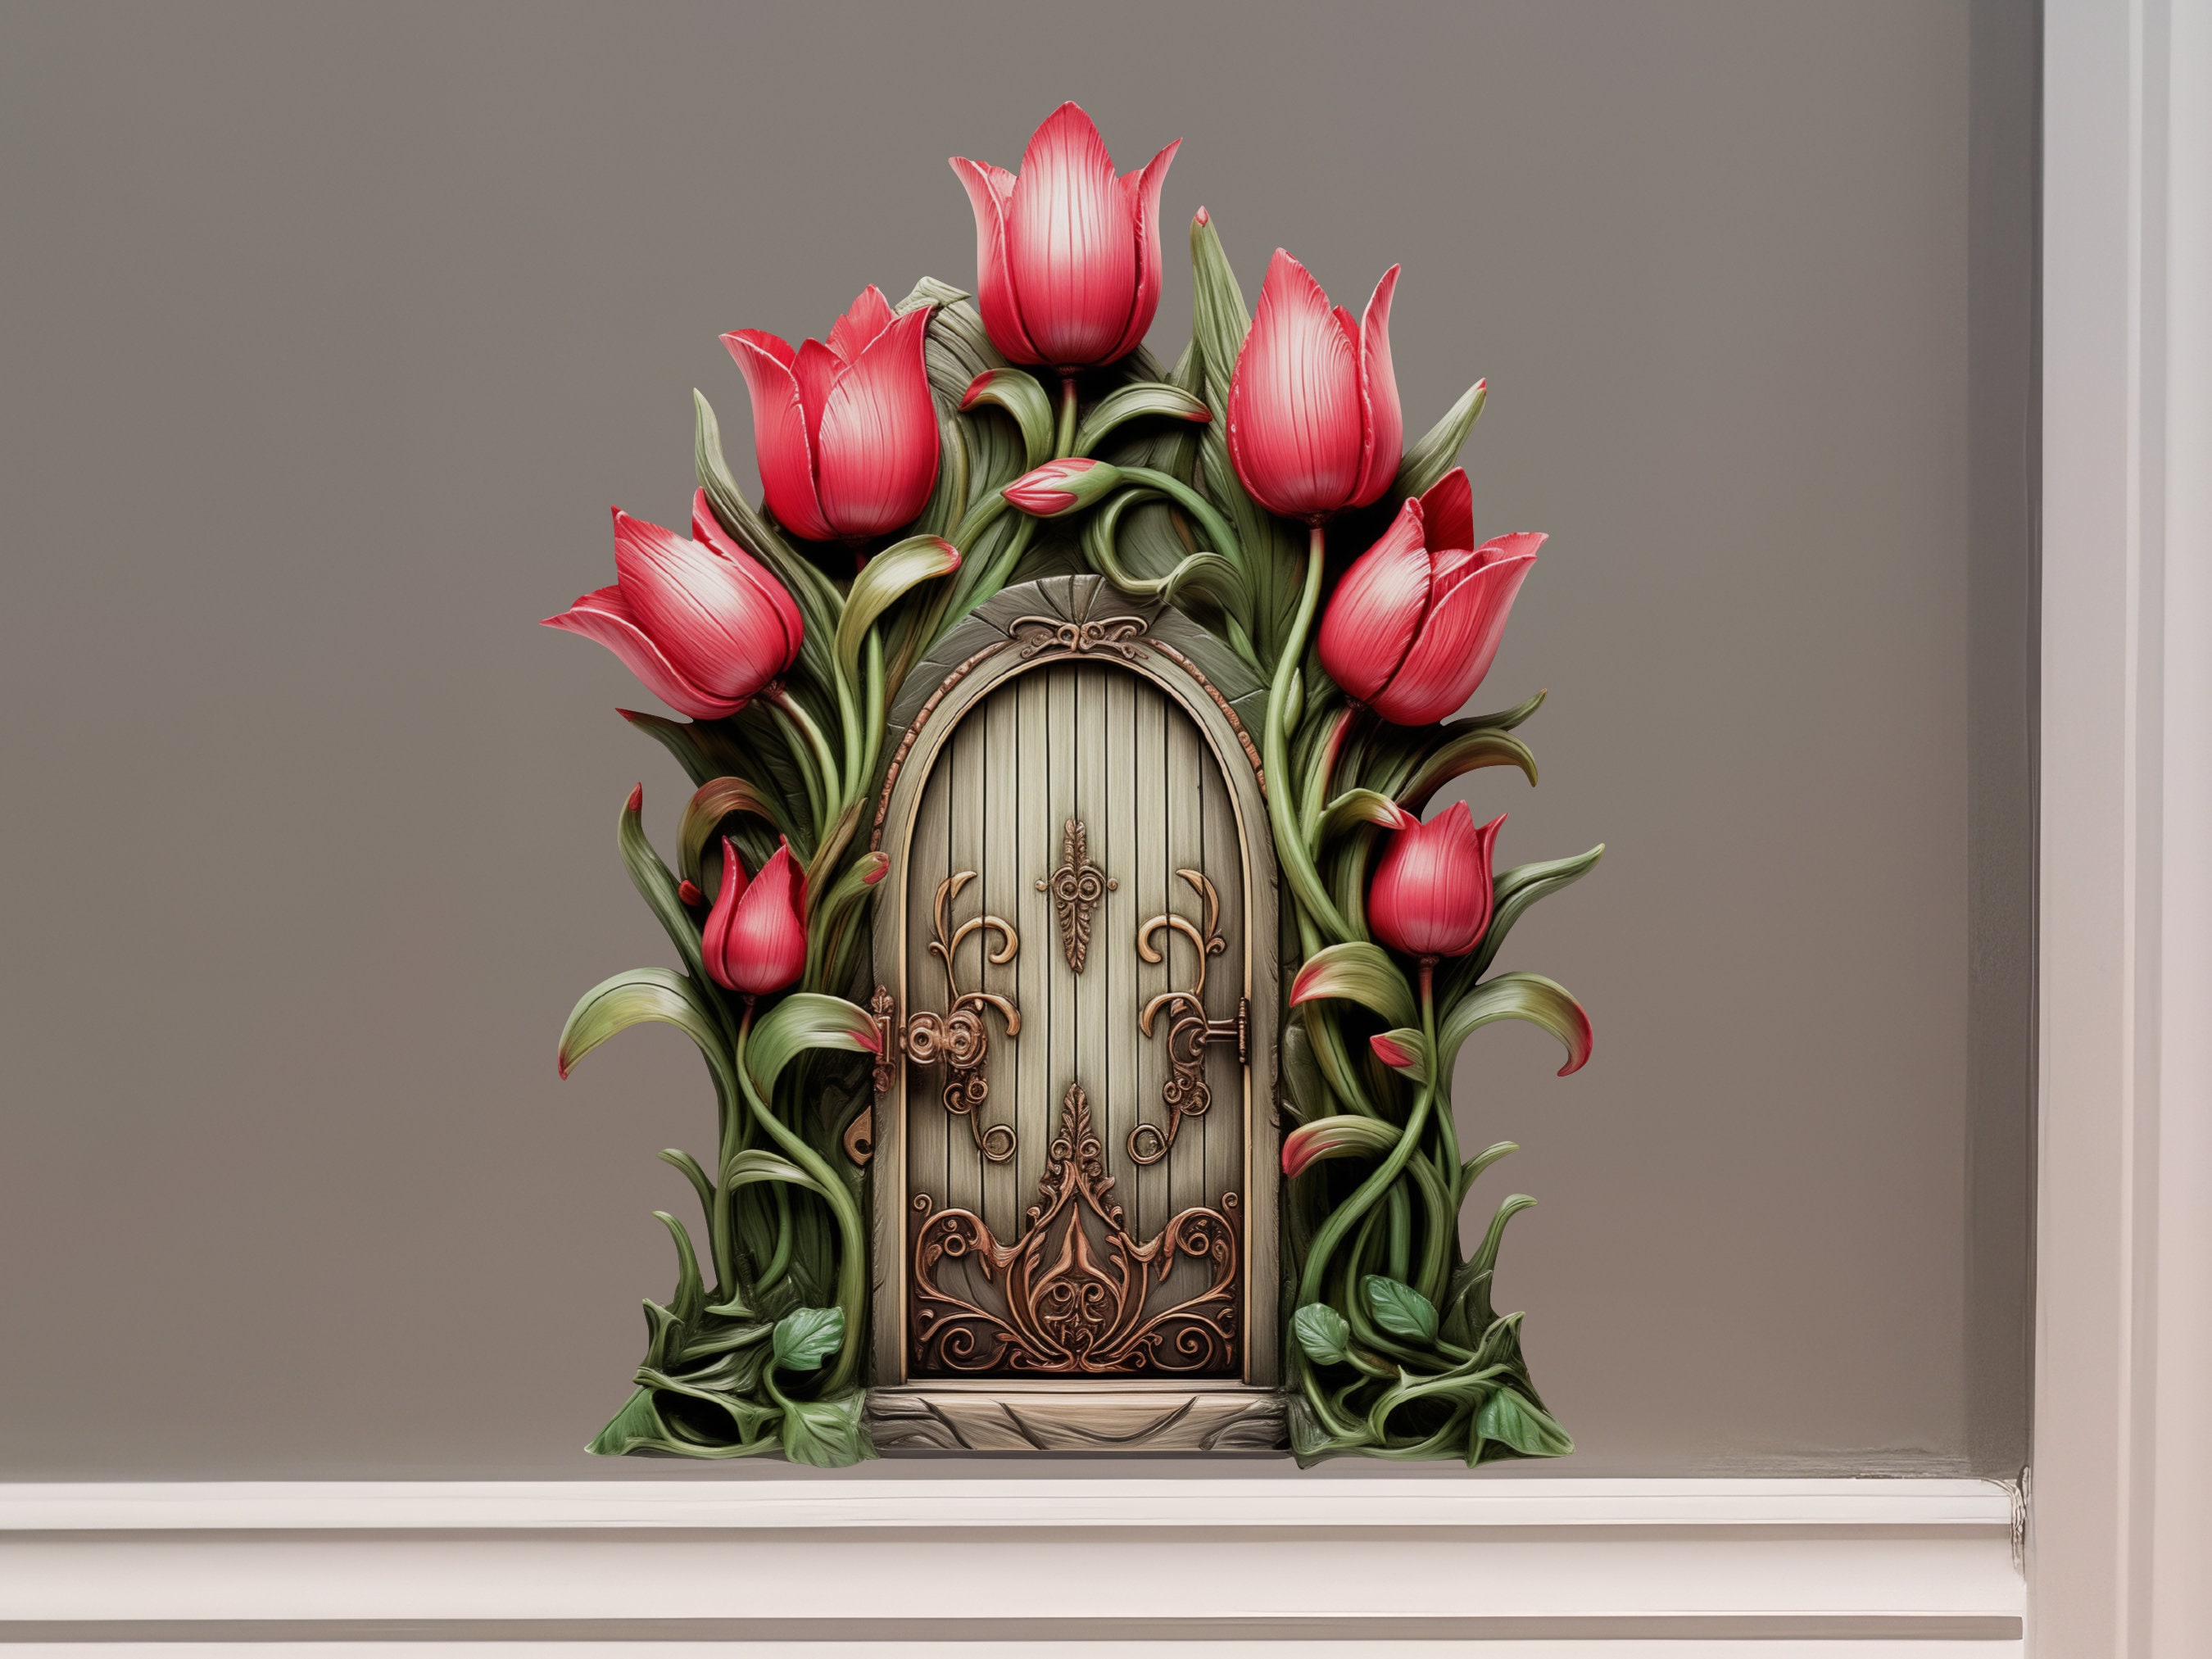 3D Dutch Floral Colorful Tulips Wall Decal Sticker